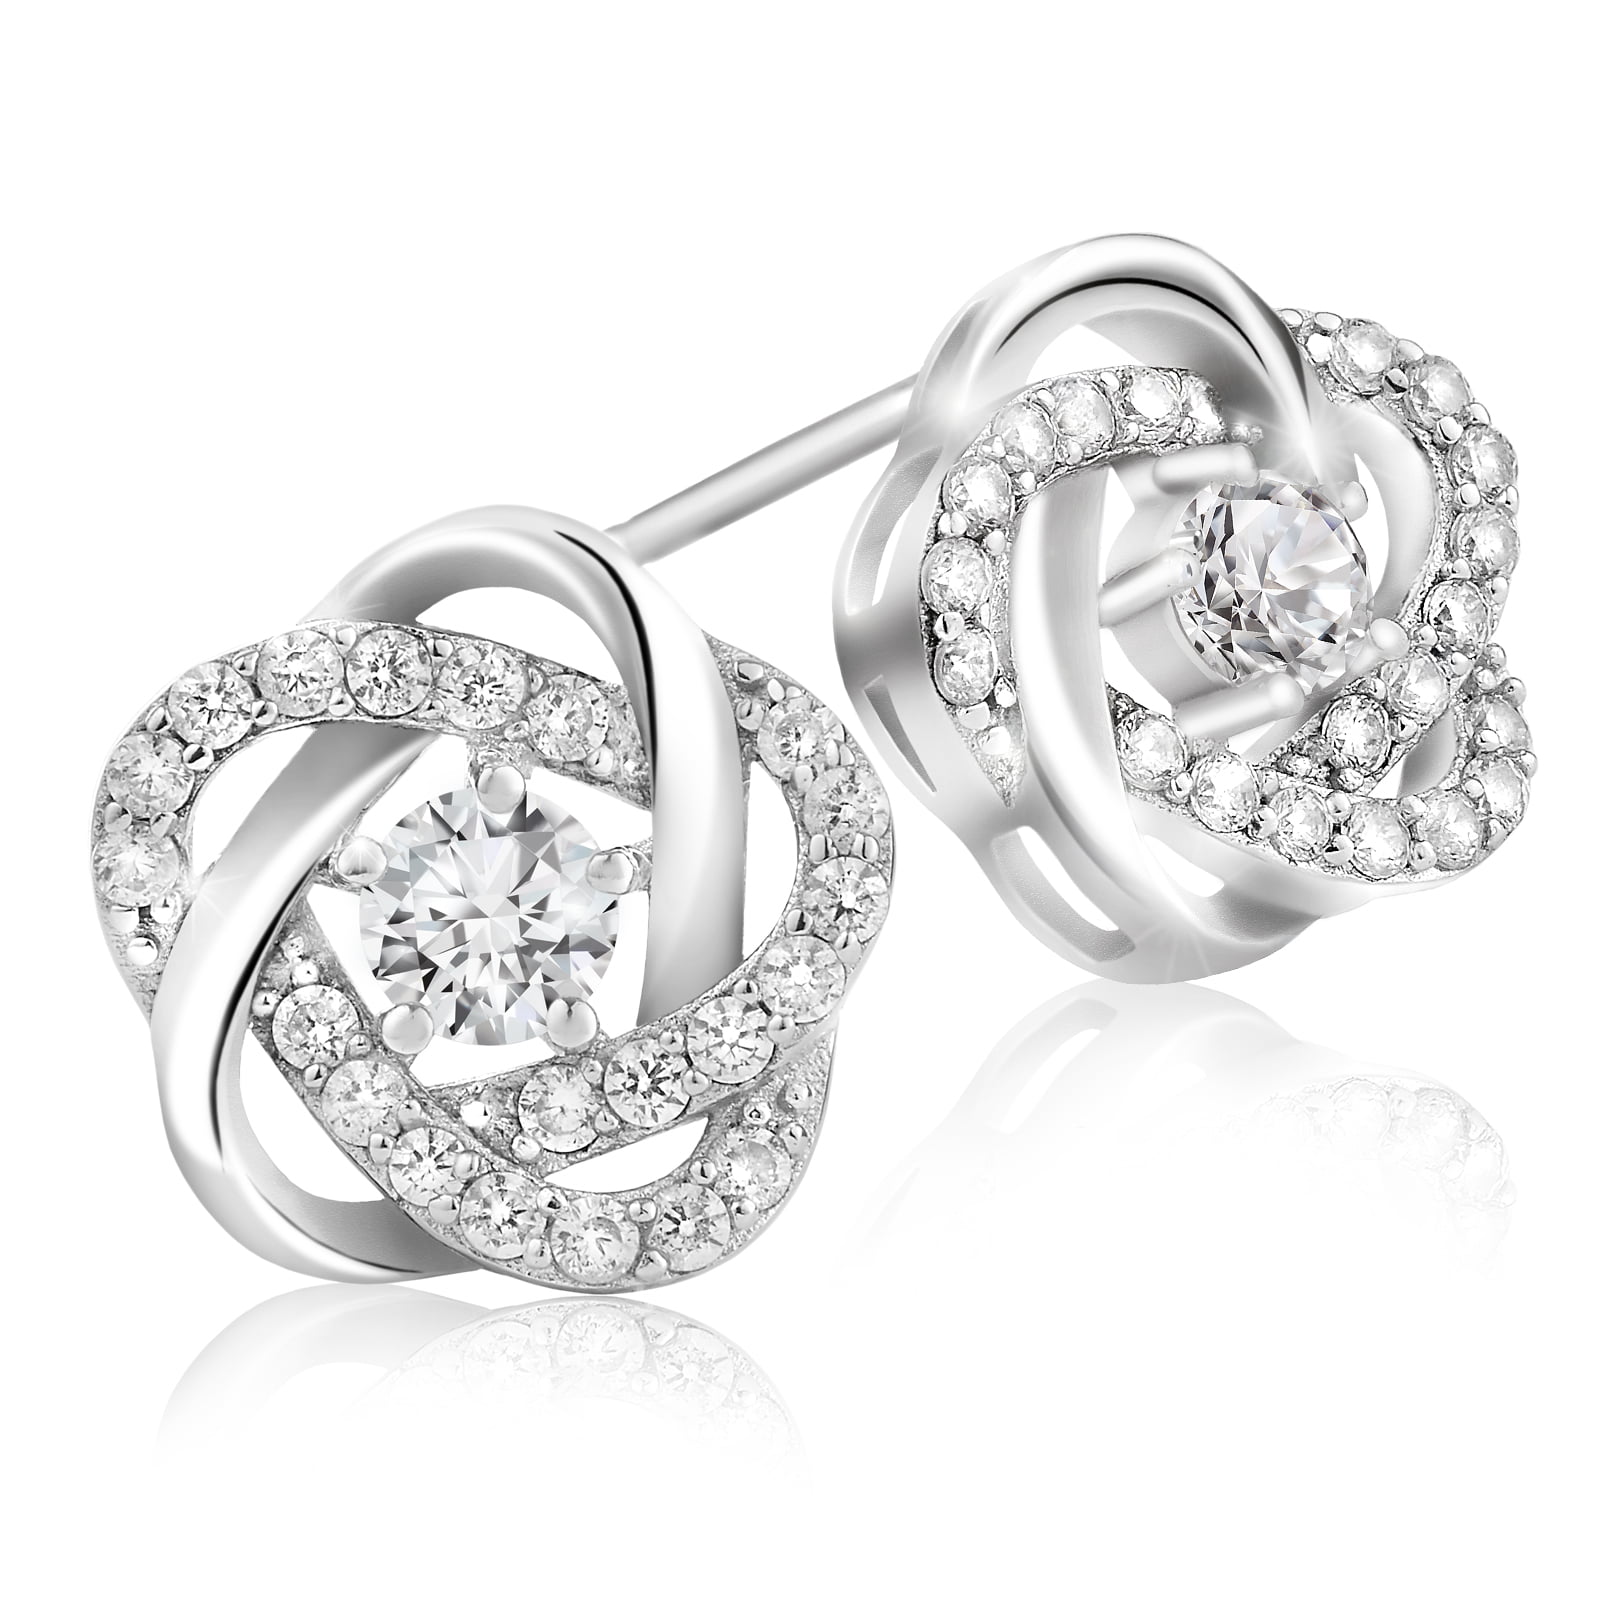 Details about   Platinum Sterling Silver Love Knot Cable Design Diamond Cut Post Stud Earrings 